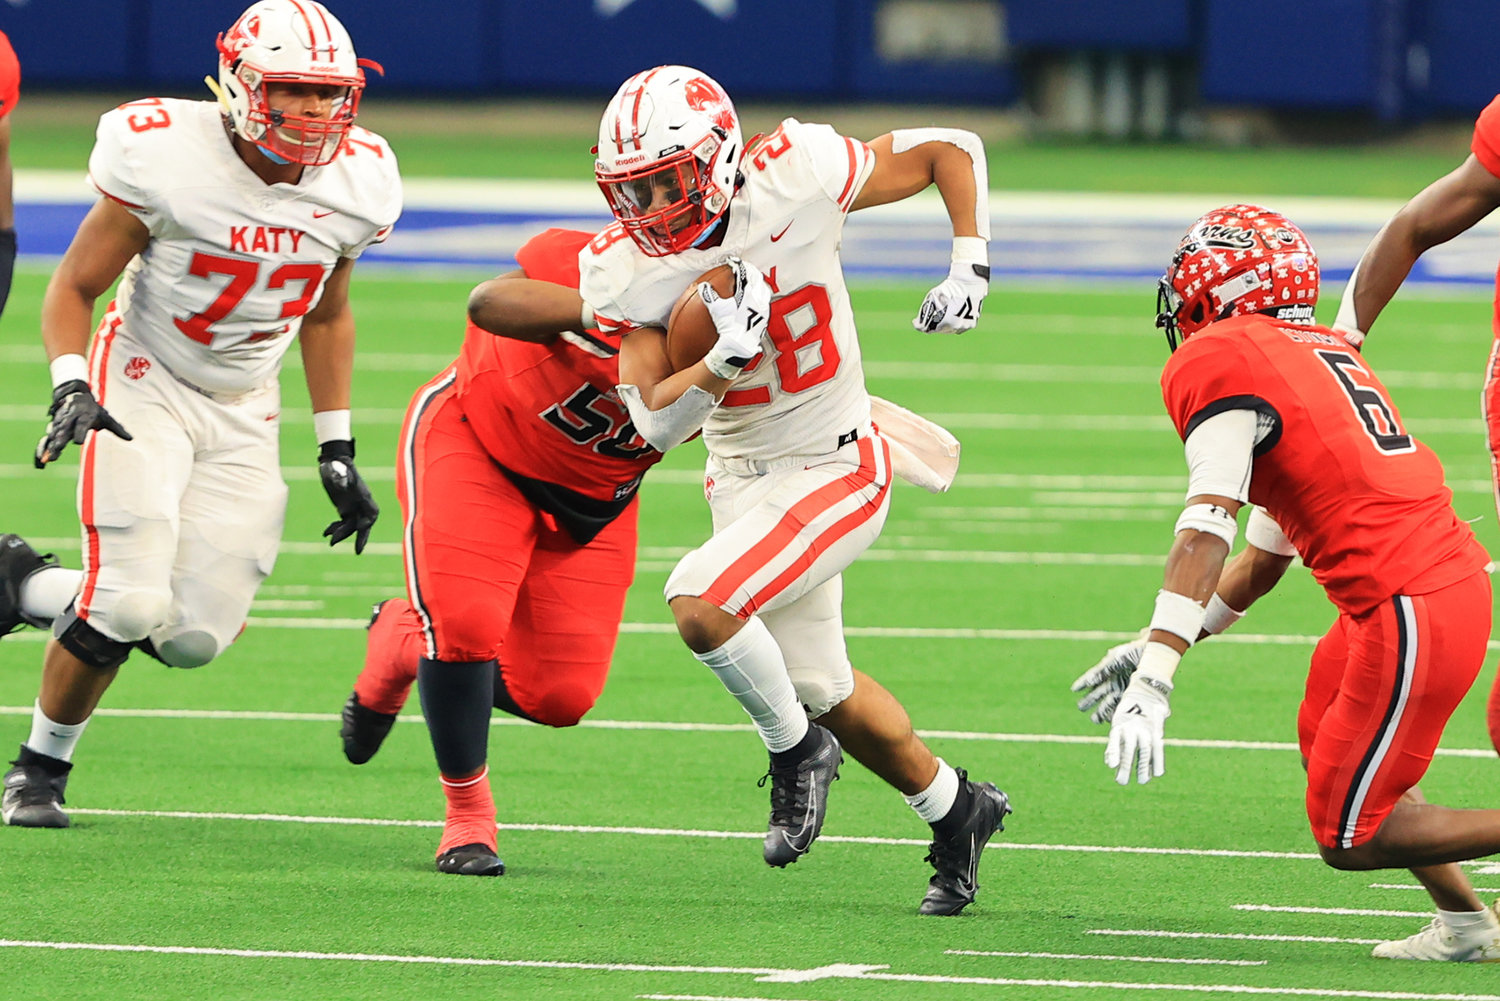 Katy senior running back Jalen Davis powers for yards during the Tigers' 51-14 win over Cedar Hill at AT&T Stadium on Saturday afternoon. Katy won the Class 6A-Division II state championship.